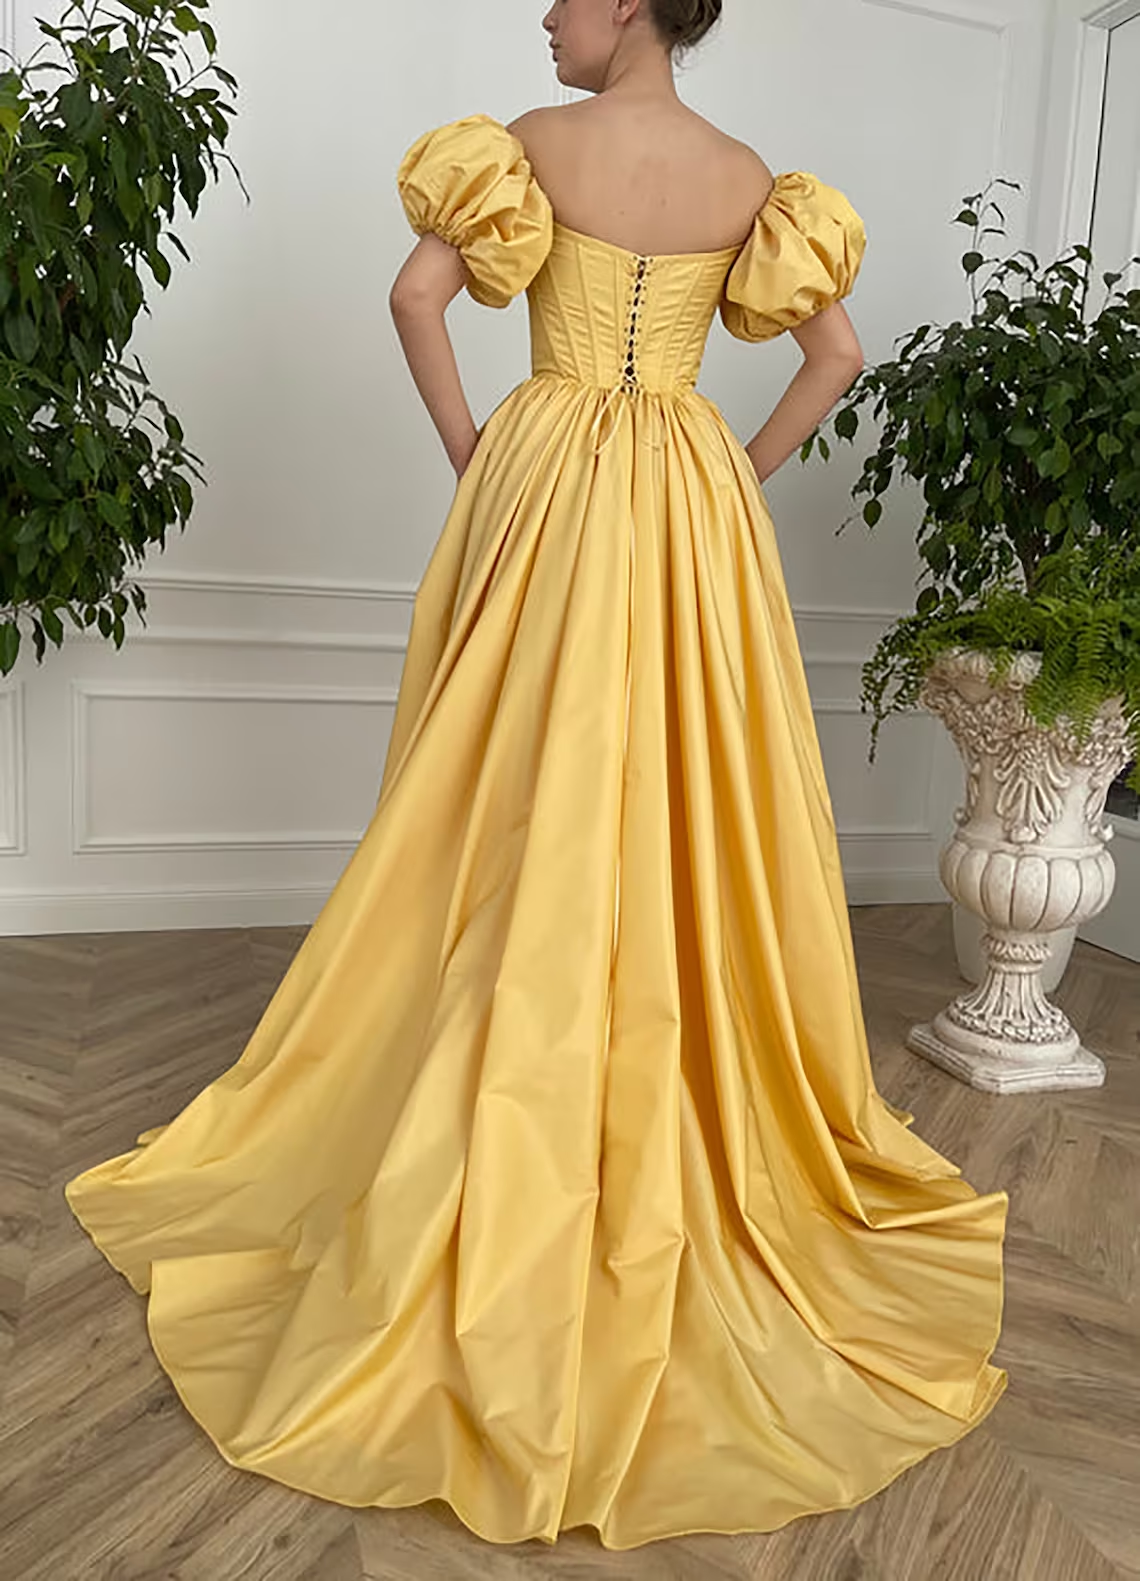 Vintage Fairy Corset Dress, A line Straight Long Yellow Taffeta Prom Dress Ball Gown, Short Sleeve Wedding Ball Gown Prom Dress with Slit gh2420